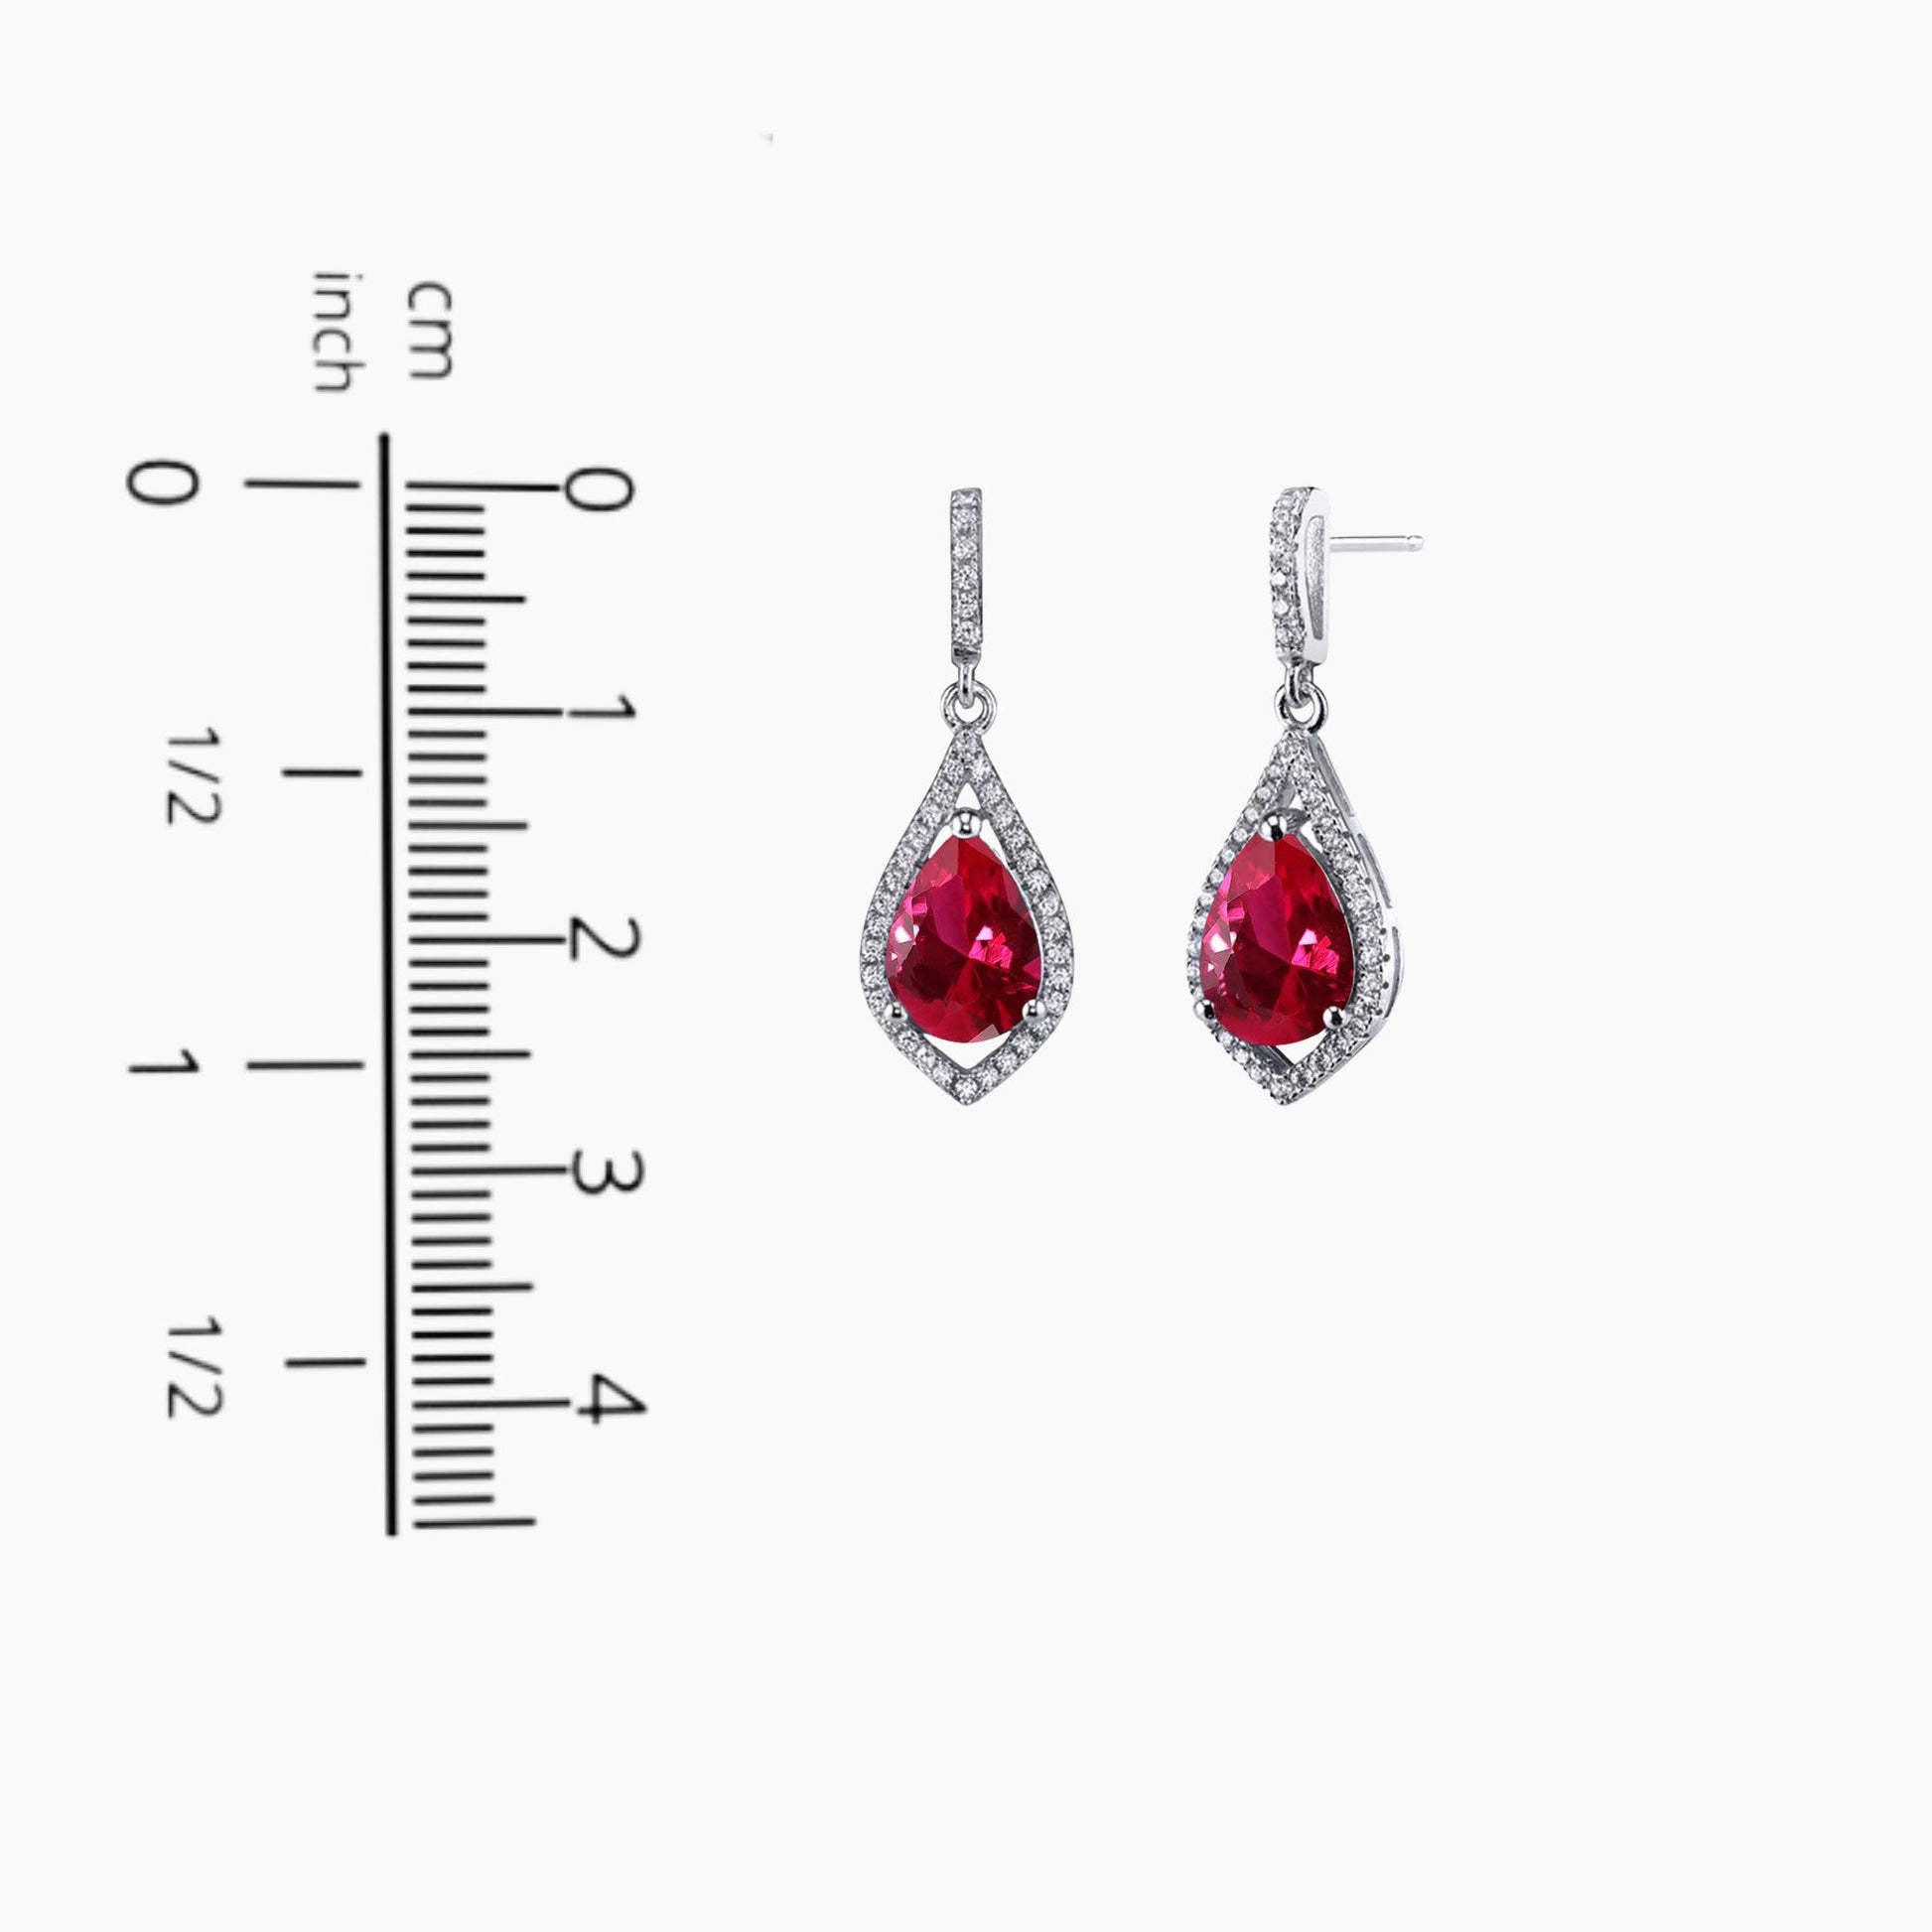  Find your perfect style with our Solitaire Earrings sizing guide.